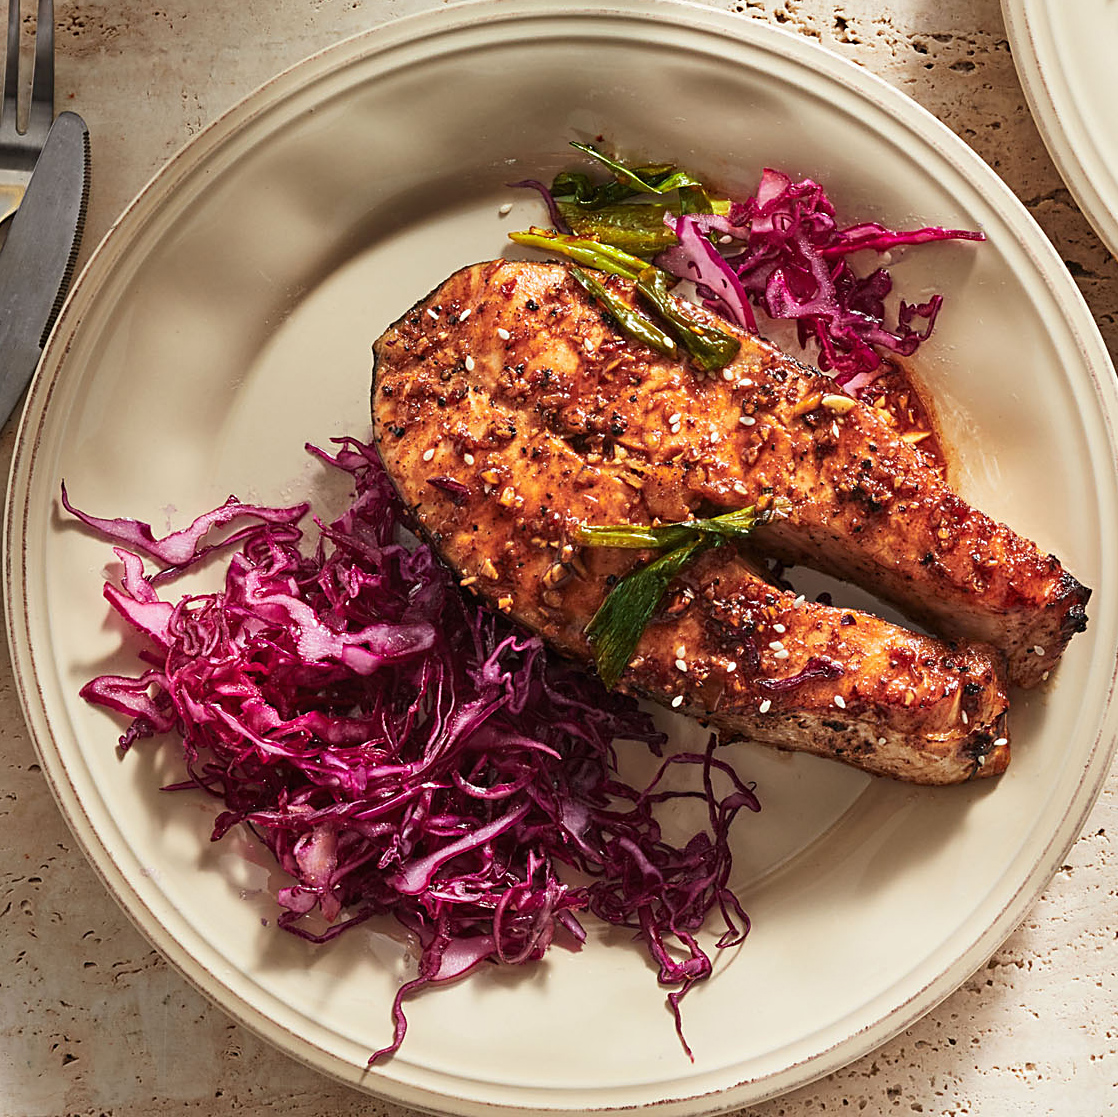 Ginger-Garlic Glazed Almost-Anything Oven Packet with Lettuce or Cabbage Slaw